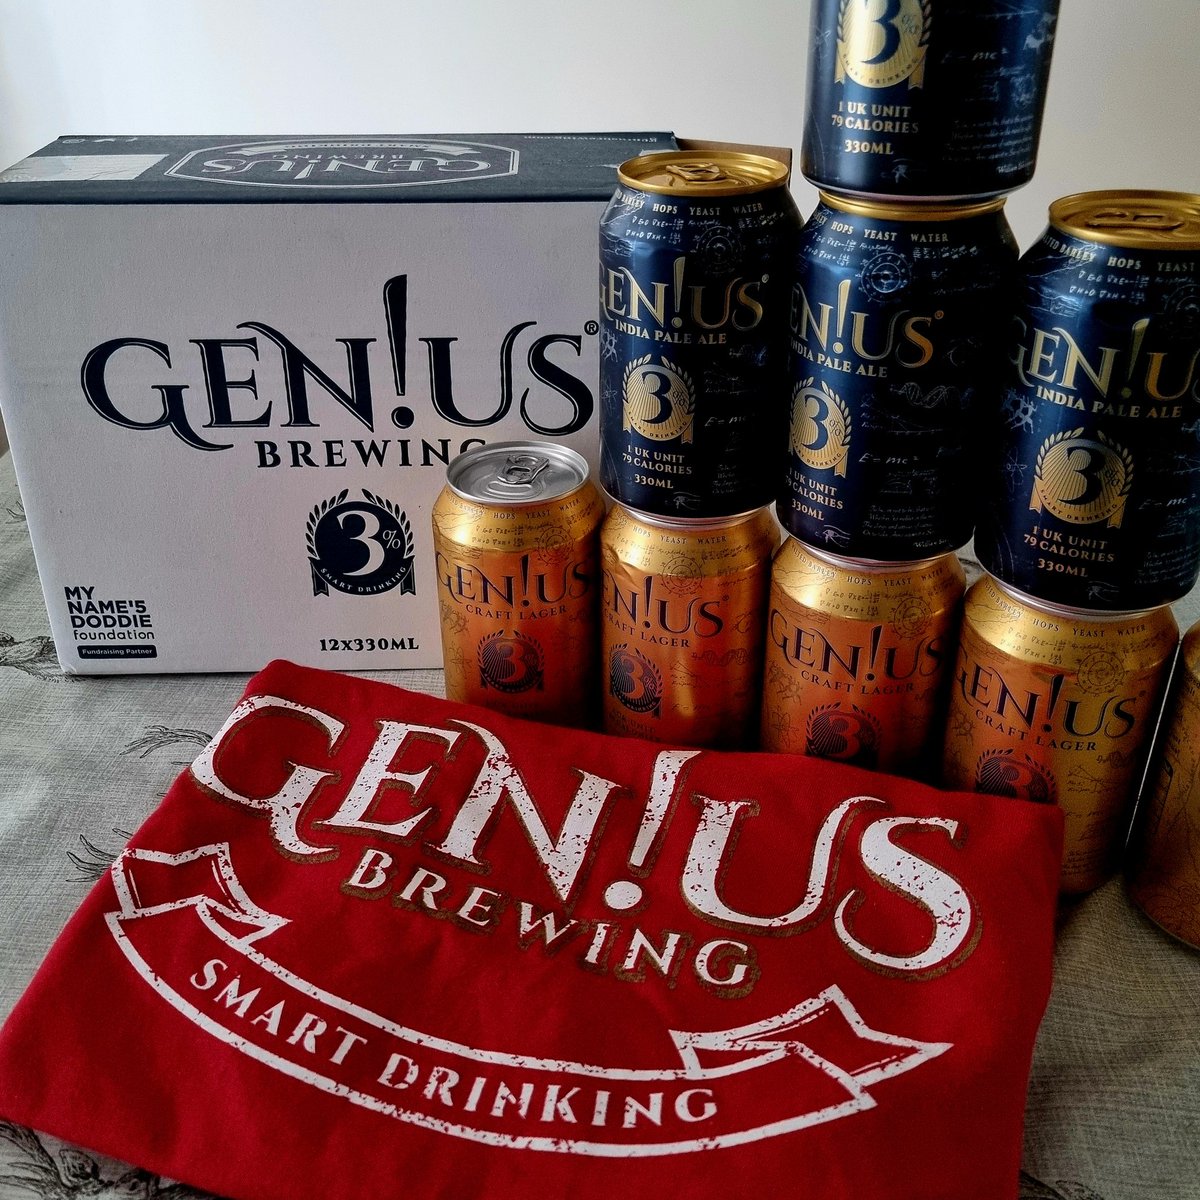 Massive thanks to the amazing @GeniusBrewing for my prize! 🤩🍻

Head over to their Facebook page and share your #DoddieAid adventures for your chance to win too! 💛💙

#SmartDrinking #TacklingMND #BePartOfTheCure